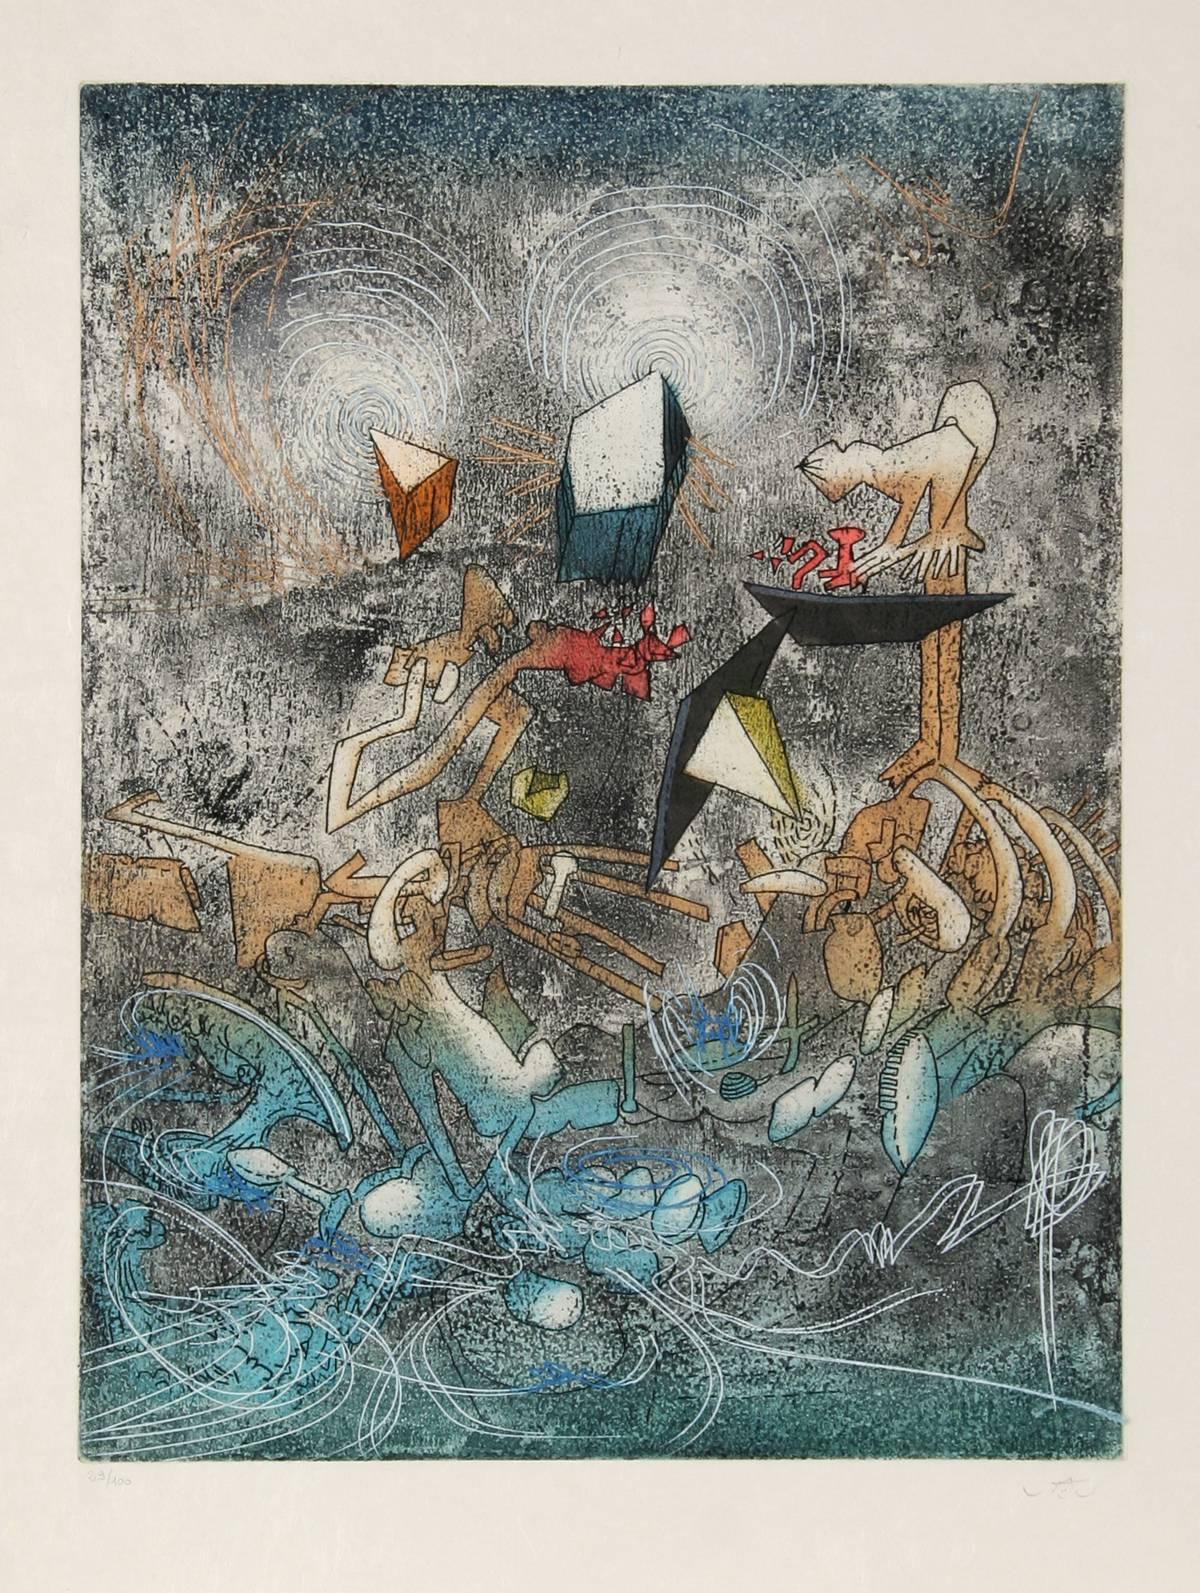 Artist: Roberto Matta, Chilean (1911 - 2002)
Title: Hom'mere V - N'ous - 1-10
Year: 1985
Medium: Suite of 10 Aquatint Etchings on Japon, each signed and numbered in pencil
Edition: 29/100
Image Size: 19.5 x 15 inches
Size: 26.5 in. x 20.5 in. (67.31